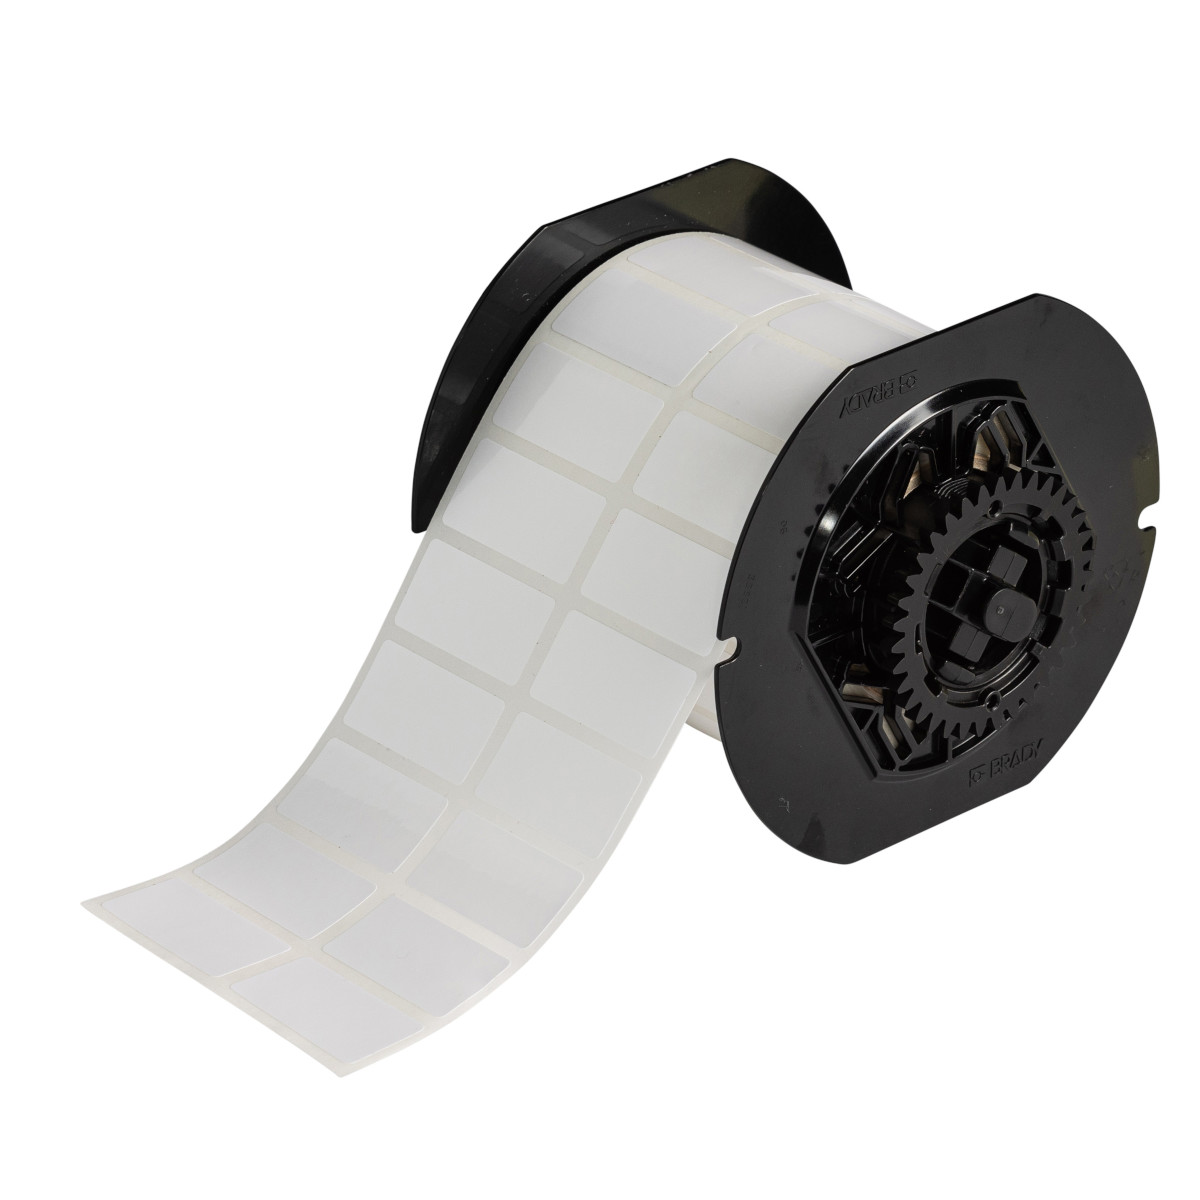 Brady B33-6-423 B33 Die-cut Component and Barcode Label, 0.75 in H x 1.5 in W, Polyester